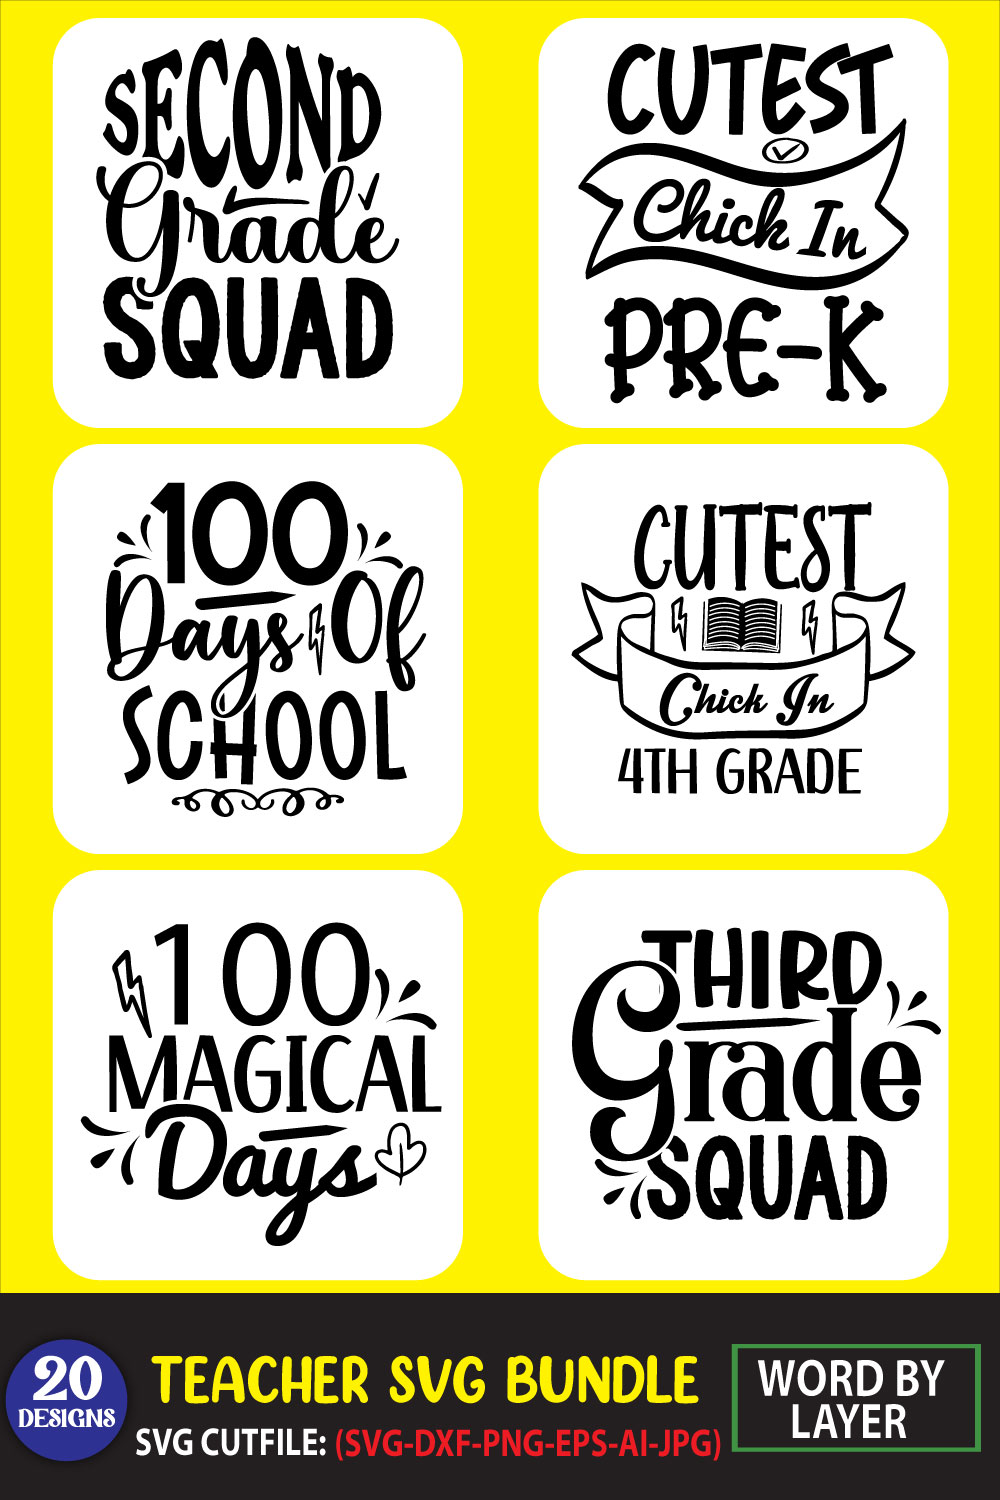 Pack of unique images for prints on the theme of the teacher